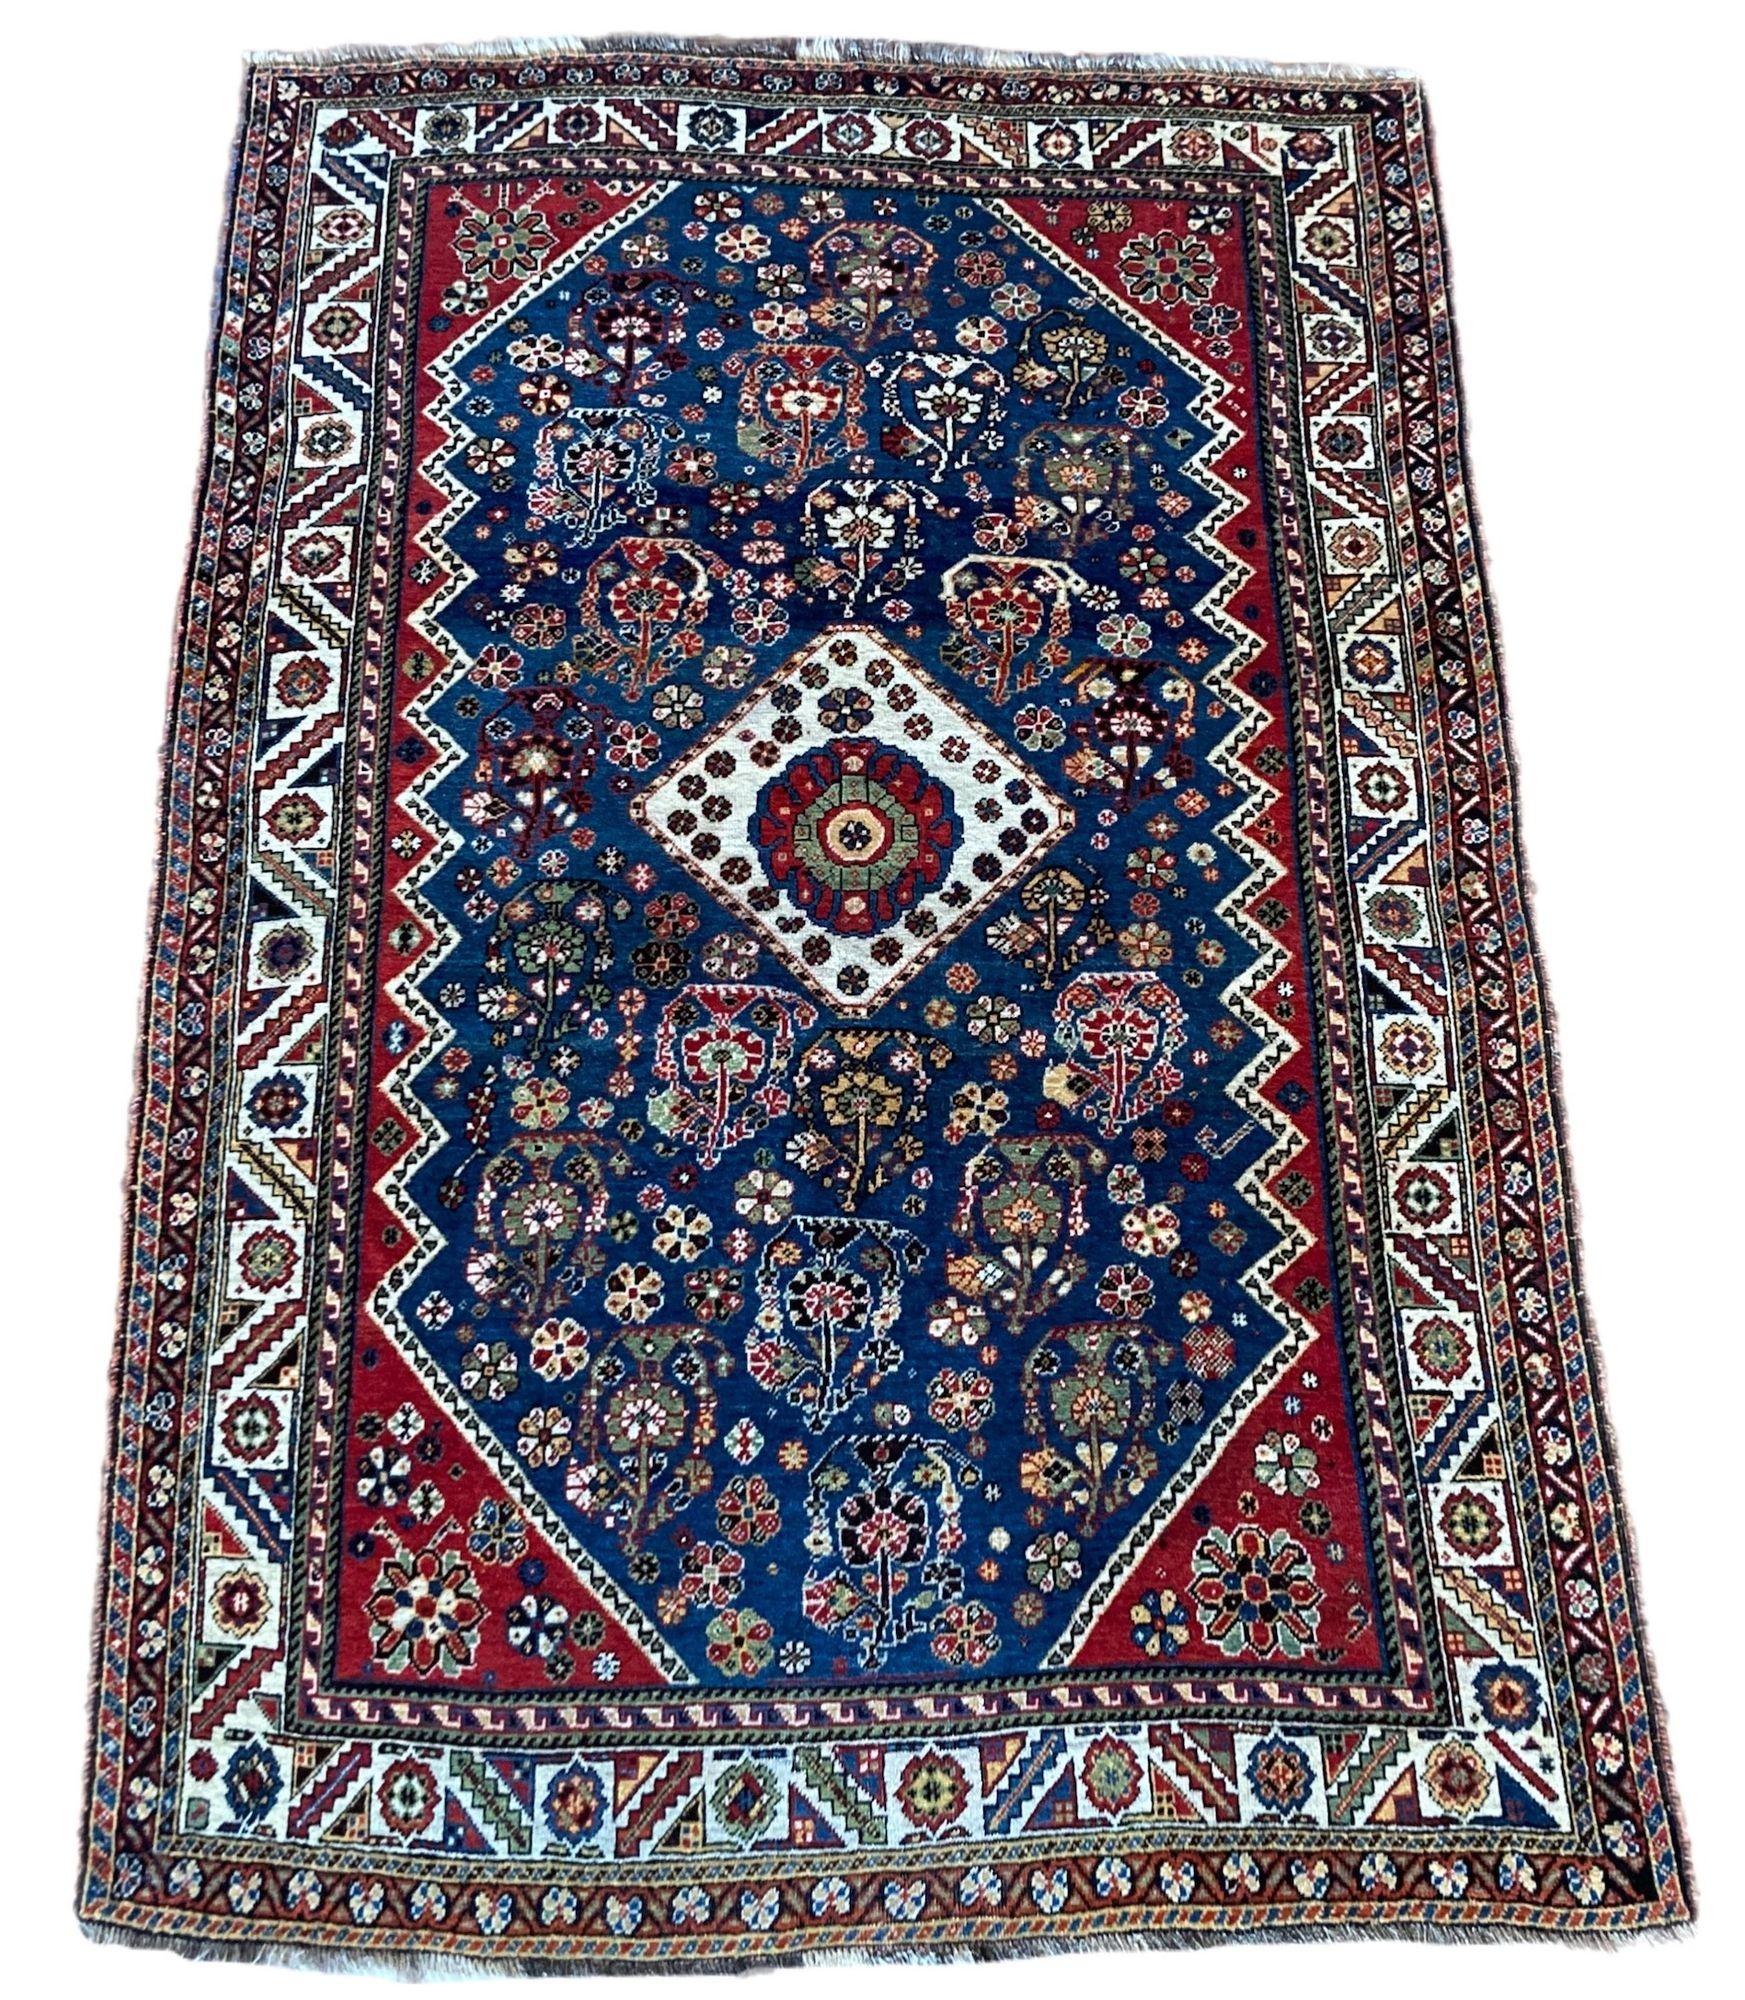 A stunning antique tribal rug, hand woven by the Qashqai tribe circa 1910. The design features a small geometrical medallion on a mid indigo field of Botehs. Very finely woven with exceptional quality wool and stunning colours
Size: 1.86m x 1.27m